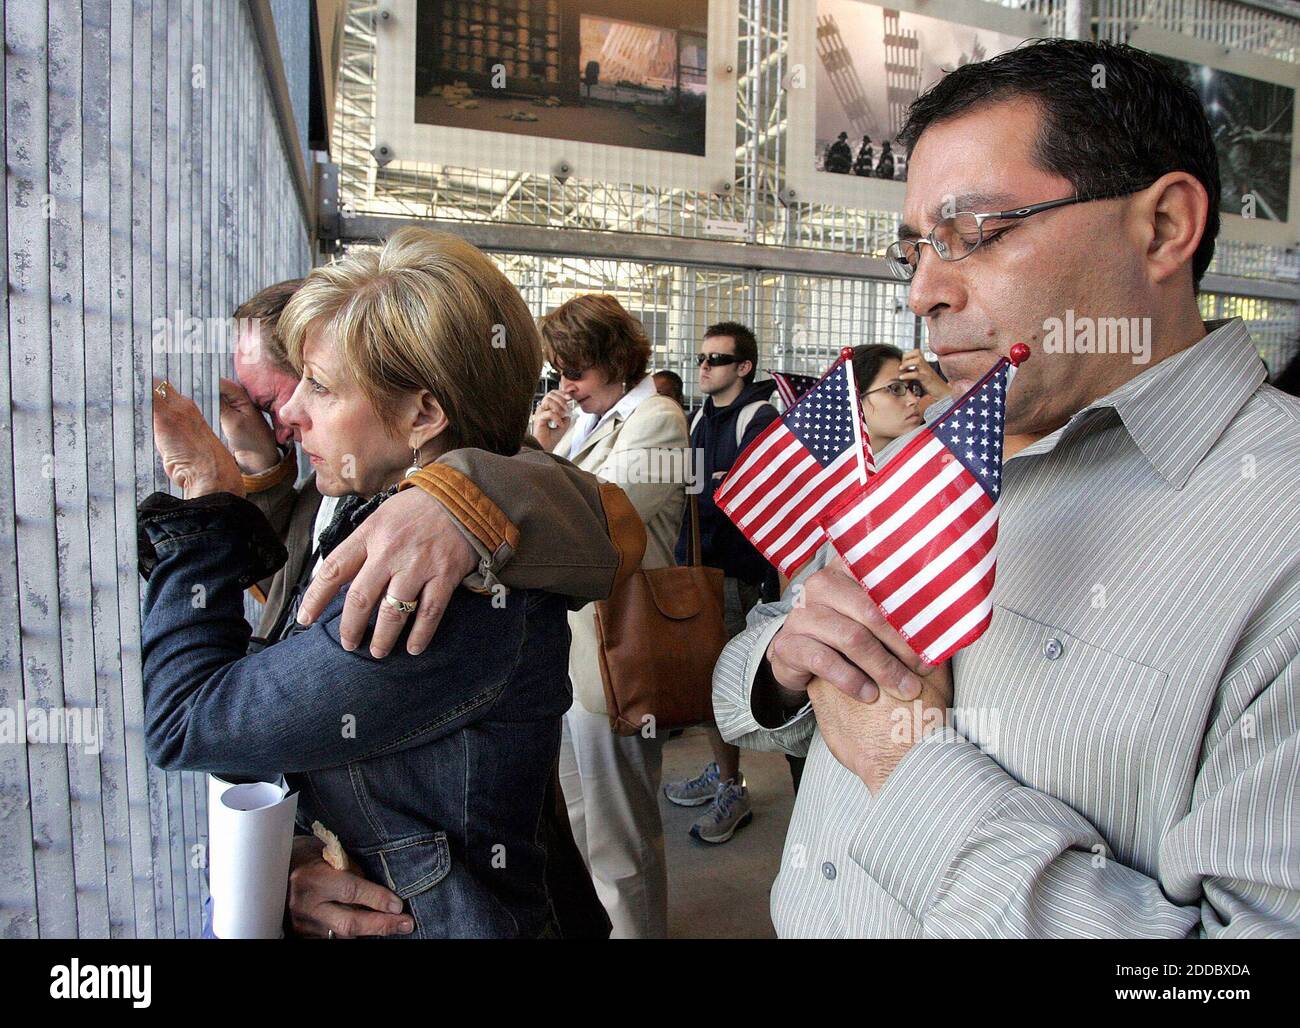 NO FILM, NO VIDEO, NO TV, NO DOCUMENTARY - Mark and Bonnie Laird (left) and Vince Martinez, from Texas, listen during the reading of names outside the World Trade Center PATH station in New York, New York, Monday, September 11, 2006. Photo by Audrey C. Tiernan/Newsday/MCT/ABACAPRESS.COM Stock Photo